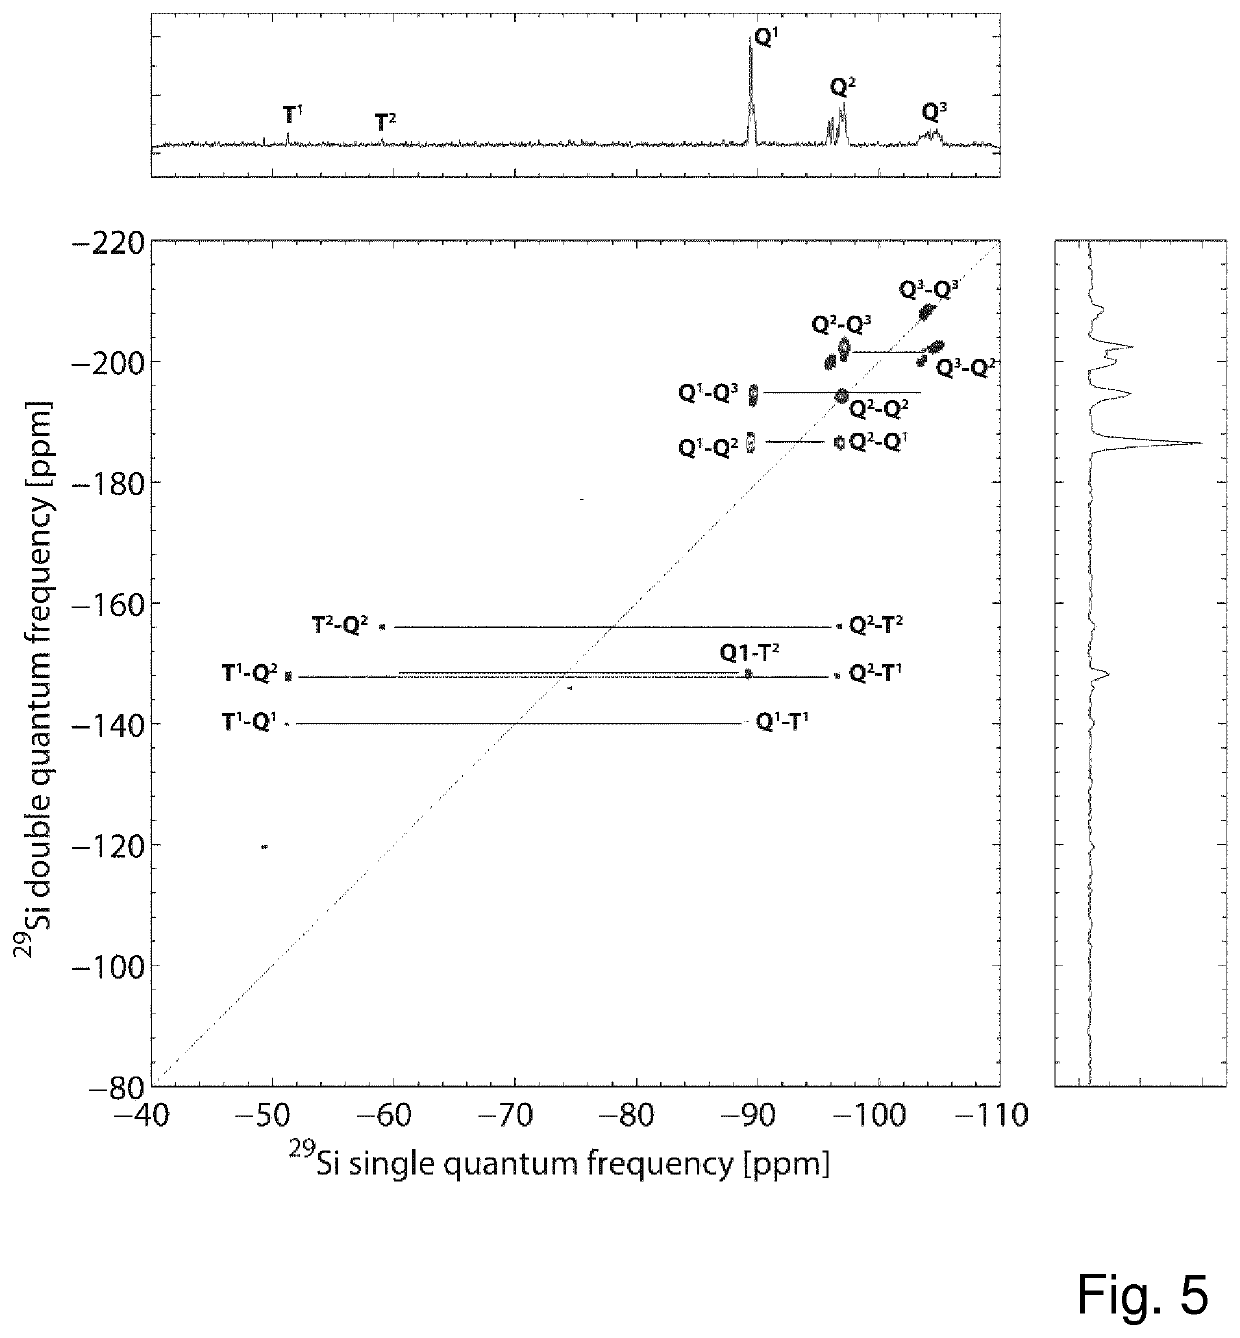 Method for preparing a siloxane based polymeric liquid material and materials made therefrom